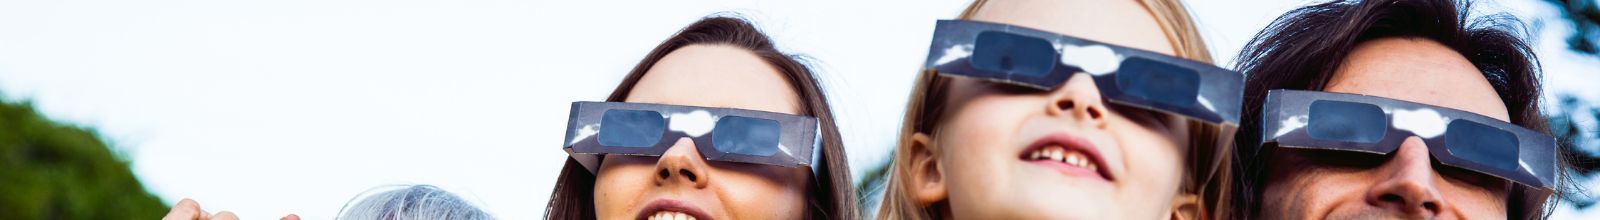 woman wearing safety glasses during Total Solar Eclipse